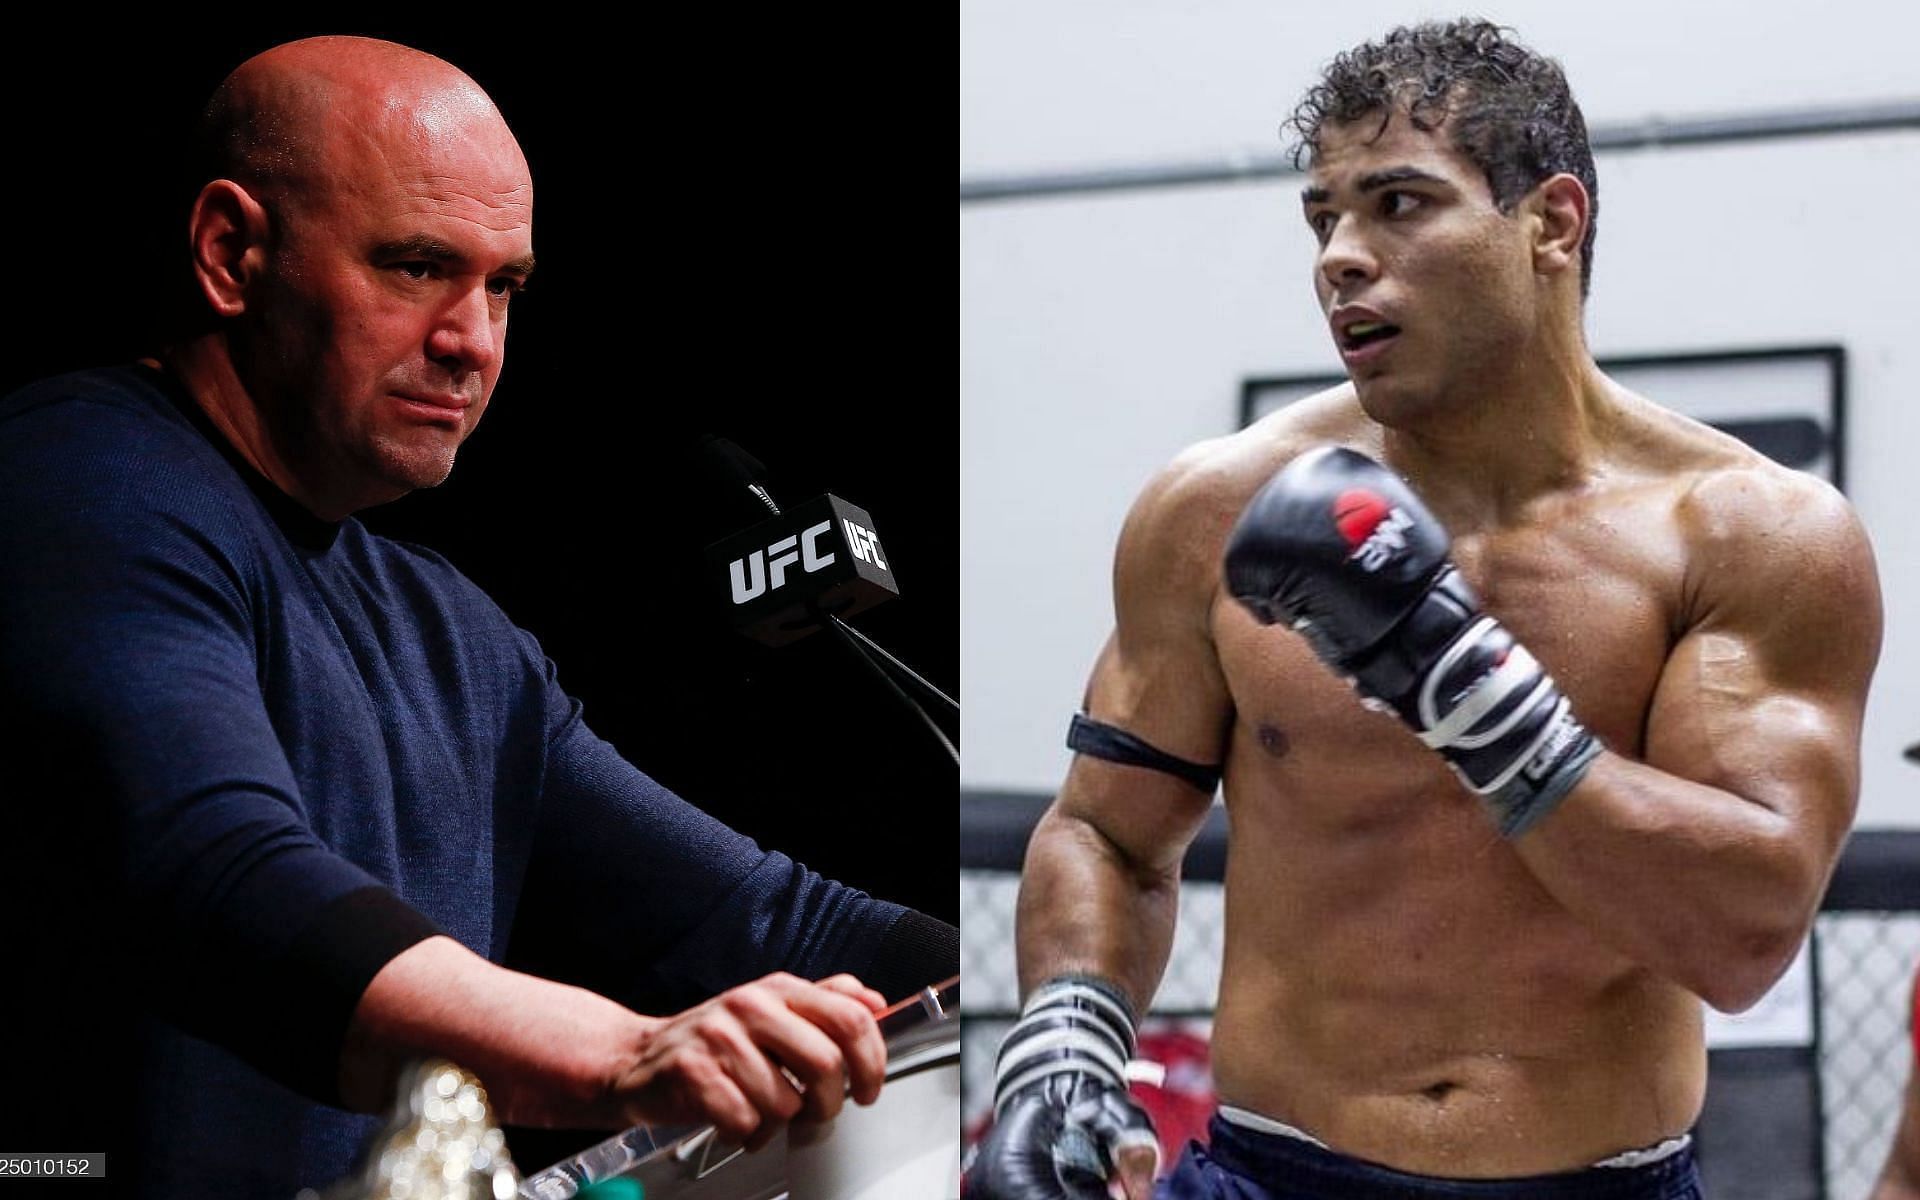 Dana White has claimed that Paulo Costa will fight at 205 moving forward